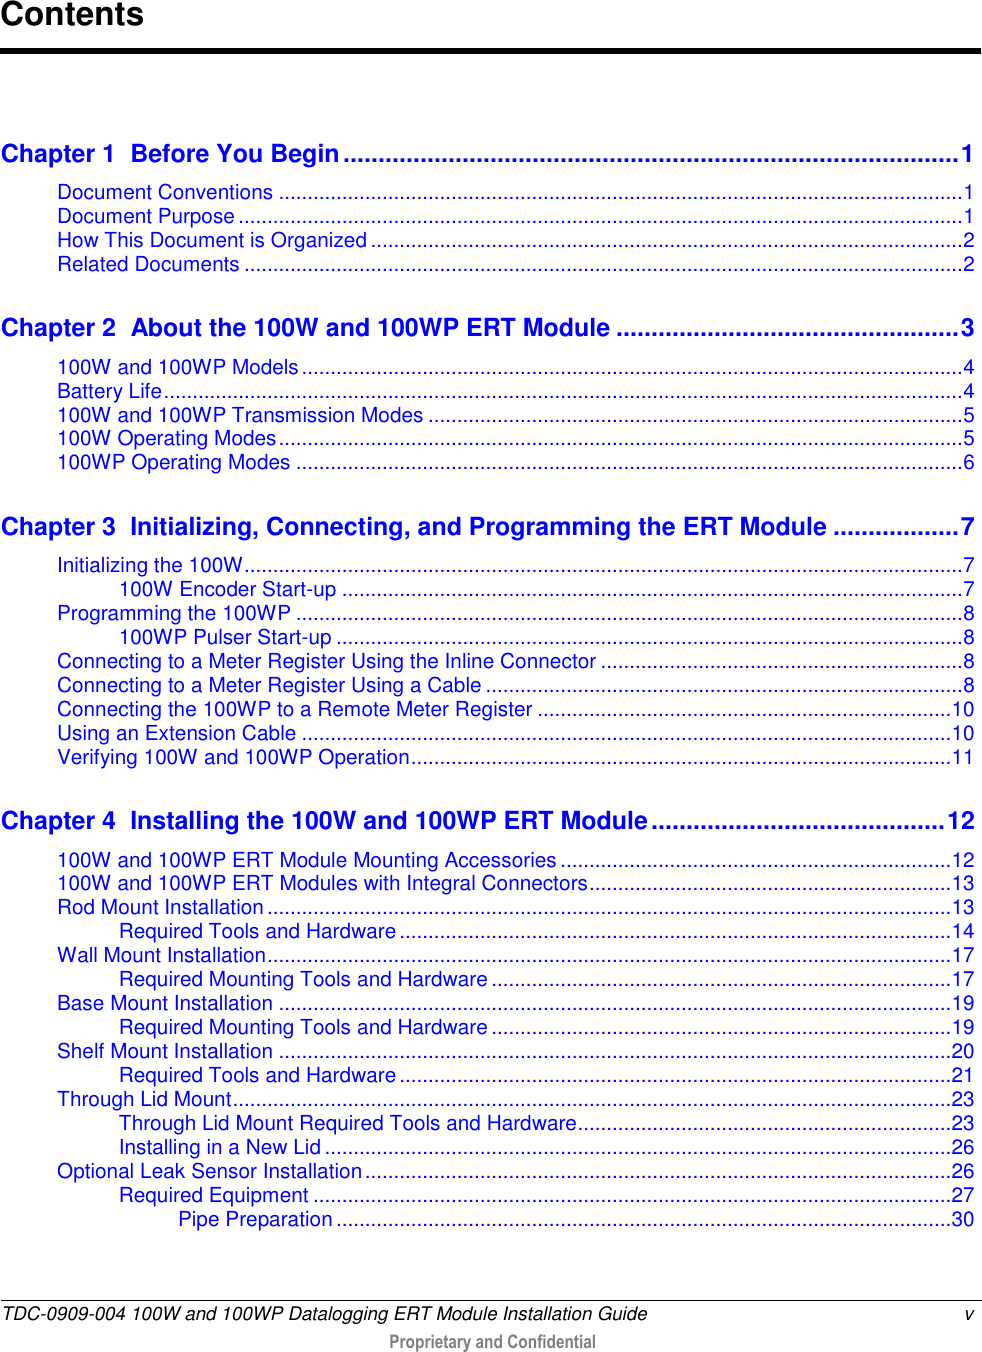  TDC-0909-004 100W and 100WP Datalogging ERT Module Installation Guide  v   Proprietary and Confidential      Chapter 1  Before You Begin ........................................................................................ 1 Document Conventions ....................................................................................................................... 1 Document Purpose .............................................................................................................................. 1 How This Document is Organized ....................................................................................................... 2 Related Documents ............................................................................................................................. 2 Chapter 2  About the 100W and 100WP ERT Module ................................................. 3 100W and 100WP Models ................................................................................................................... 4 Battery Life ........................................................................................................................................... 4 100W and 100WP Transmission Modes ............................................................................................. 5 100W Operating Modes ....................................................................................................................... 5 100WP Operating Modes .................................................................................................................... 6 Chapter 3  Initializing, Connecting, and Programming the ERT Module .................. 7 Initializing the 100W ............................................................................................................................. 7 100W Encoder Start-up ............................................................................................................ 7 Programming the 100WP .................................................................................................................... 8 100WP Pulser Start-up ............................................................................................................. 8 Connecting to a Meter Register Using the Inline Connector ............................................................... 8 Connecting to a Meter Register Using a Cable ................................................................................... 8 Connecting the 100WP to a Remote Meter Register ........................................................................ 10 Using an Extension Cable ................................................................................................................. 10 Verifying 100W and 100WP Operation .............................................................................................. 11 Chapter 4  Installing the 100W and 100WP ERT Module .......................................... 12 100W and 100WP ERT Module Mounting Accessories .................................................................... 12 100W and 100WP ERT Modules with Integral Connectors ............................................................... 13 Rod Mount Installation ....................................................................................................................... 13 Required Tools and Hardware ................................................................................................ 14 Wall Mount Installation ....................................................................................................................... 17 Required Mounting Tools and Hardware ................................................................................ 17 Base Mount Installation ..................................................................................................................... 19 Required Mounting Tools and Hardware ................................................................................ 19 Shelf Mount Installation ..................................................................................................................... 20 Required Tools and Hardware ................................................................................................ 21 Through Lid Mount ............................................................................................................................. 23 Through Lid Mount Required Tools and Hardware................................................................. 23 Installing in a New Lid ............................................................................................................. 26 Optional Leak Sensor Installation ...................................................................................................... 26 Required Equipment ............................................................................................................... 27 Pipe Preparation ........................................................................................................... 30 Contents 